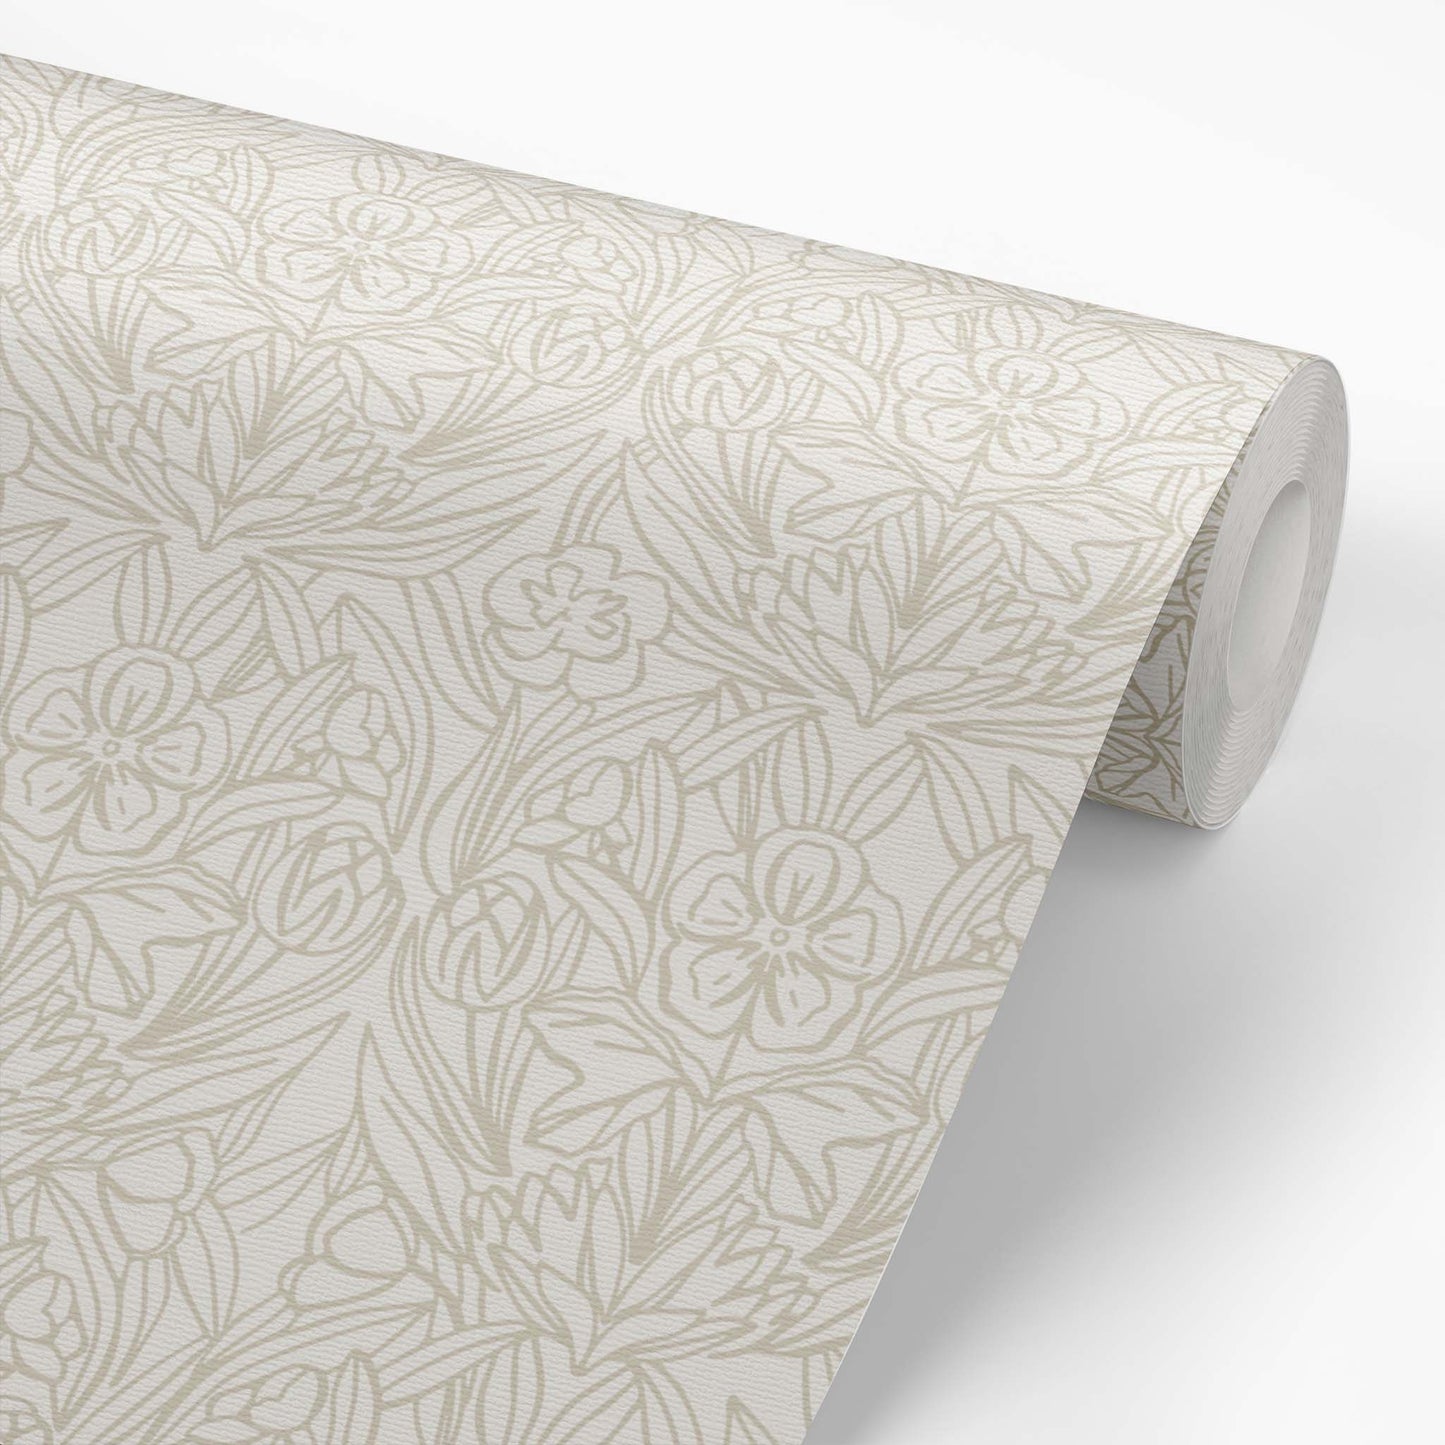 Featuring a subtle combination of florals, this taupe wallpaper adds a touch of elegance shown on a wallpaper roll.